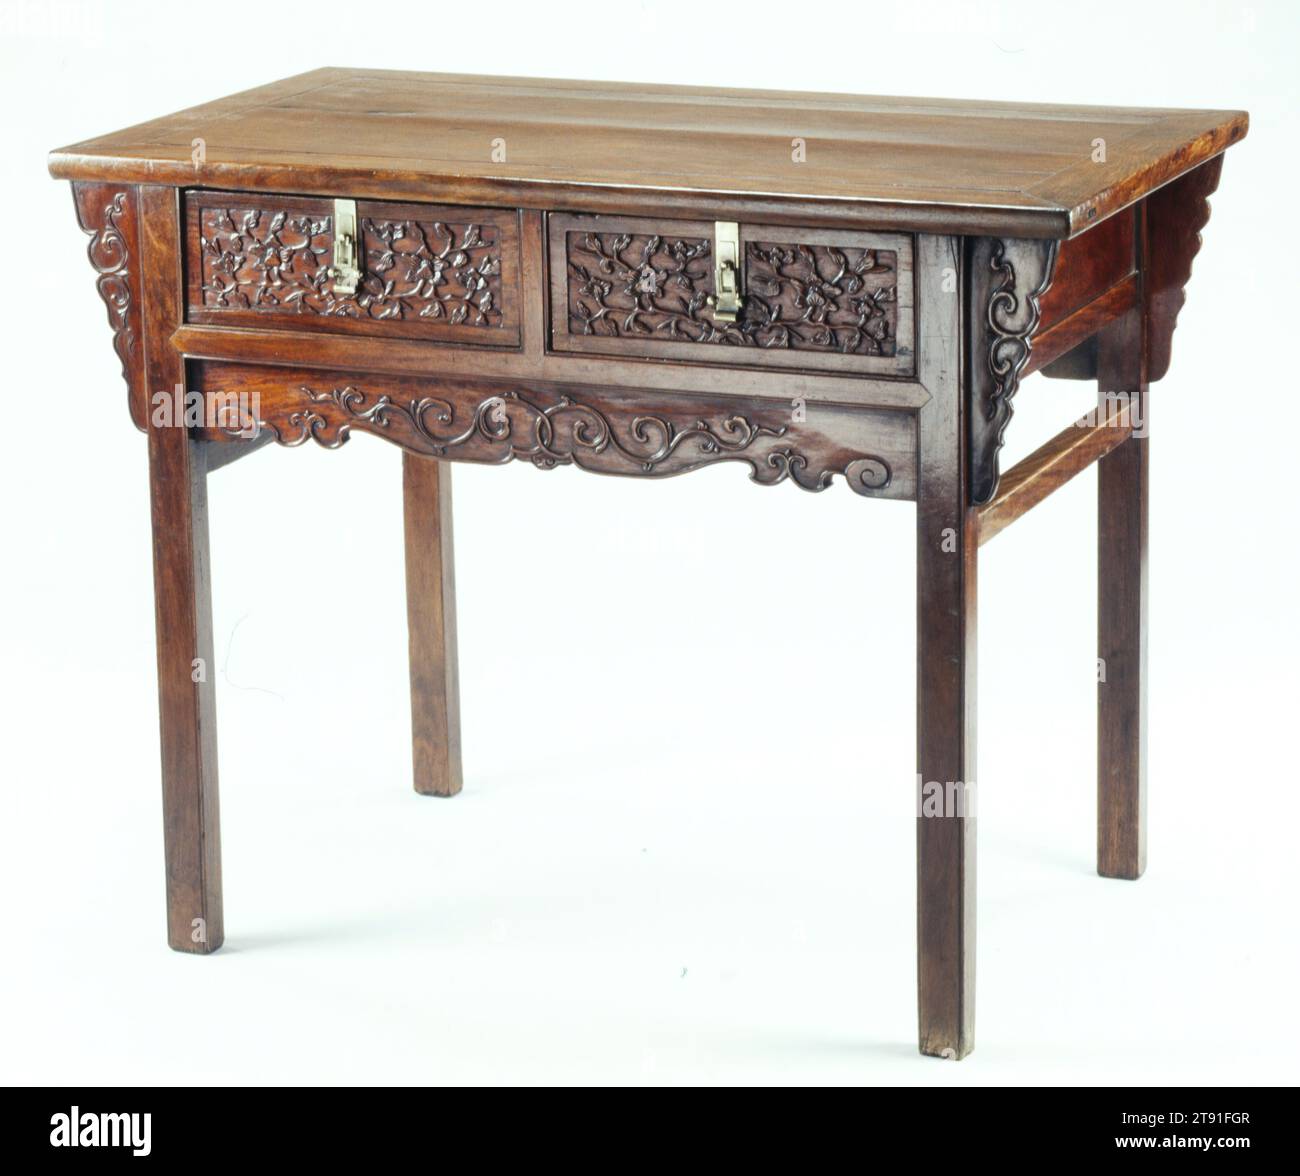 Two-Drawer Table, 17th century, 34 1/8 x 43 13/16 x 24 11/16 in. (86.68 x 111.28 x 62.71 cm), Huang-hua-li hardwood, China, 17th century, While useful for the storage of small items, recessed-leg tables with drawers do not appear often in late Ming woodcuts or paintings and relatively few have survived. The late Ming edition of the Lu Ban Ching carpenter's manual does, however, illustrate a woman using a two-drawer table like this one in combination with a mirror stand as a dressing table. The sumptuous carving of flowering plum branches on the drawer fronts is decoration Stock Photo